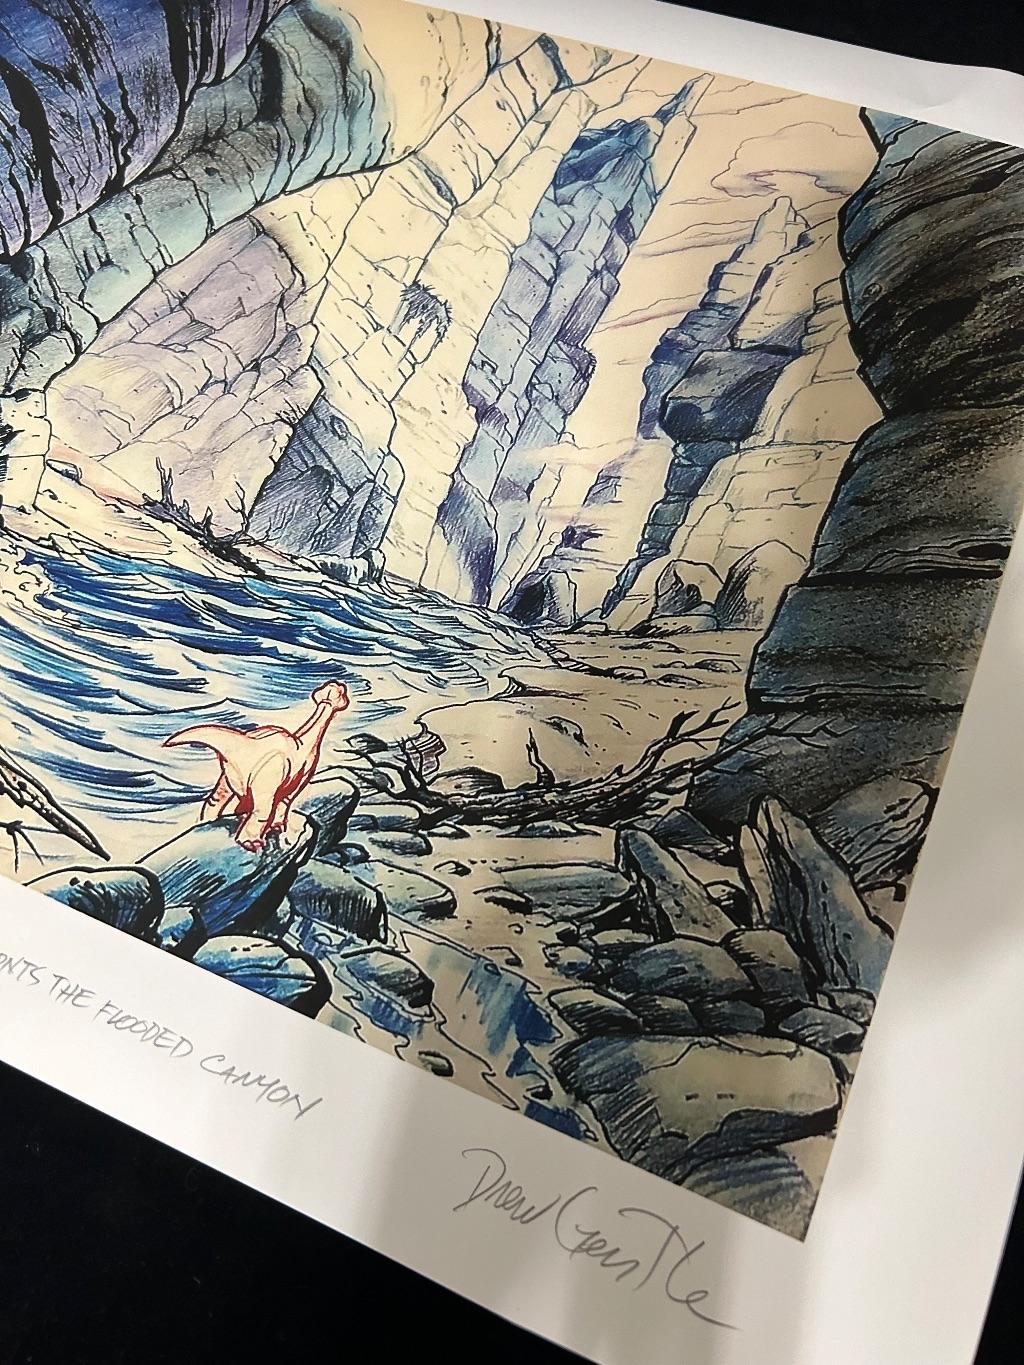 Land Before Time - Signed Drew Gentle Print